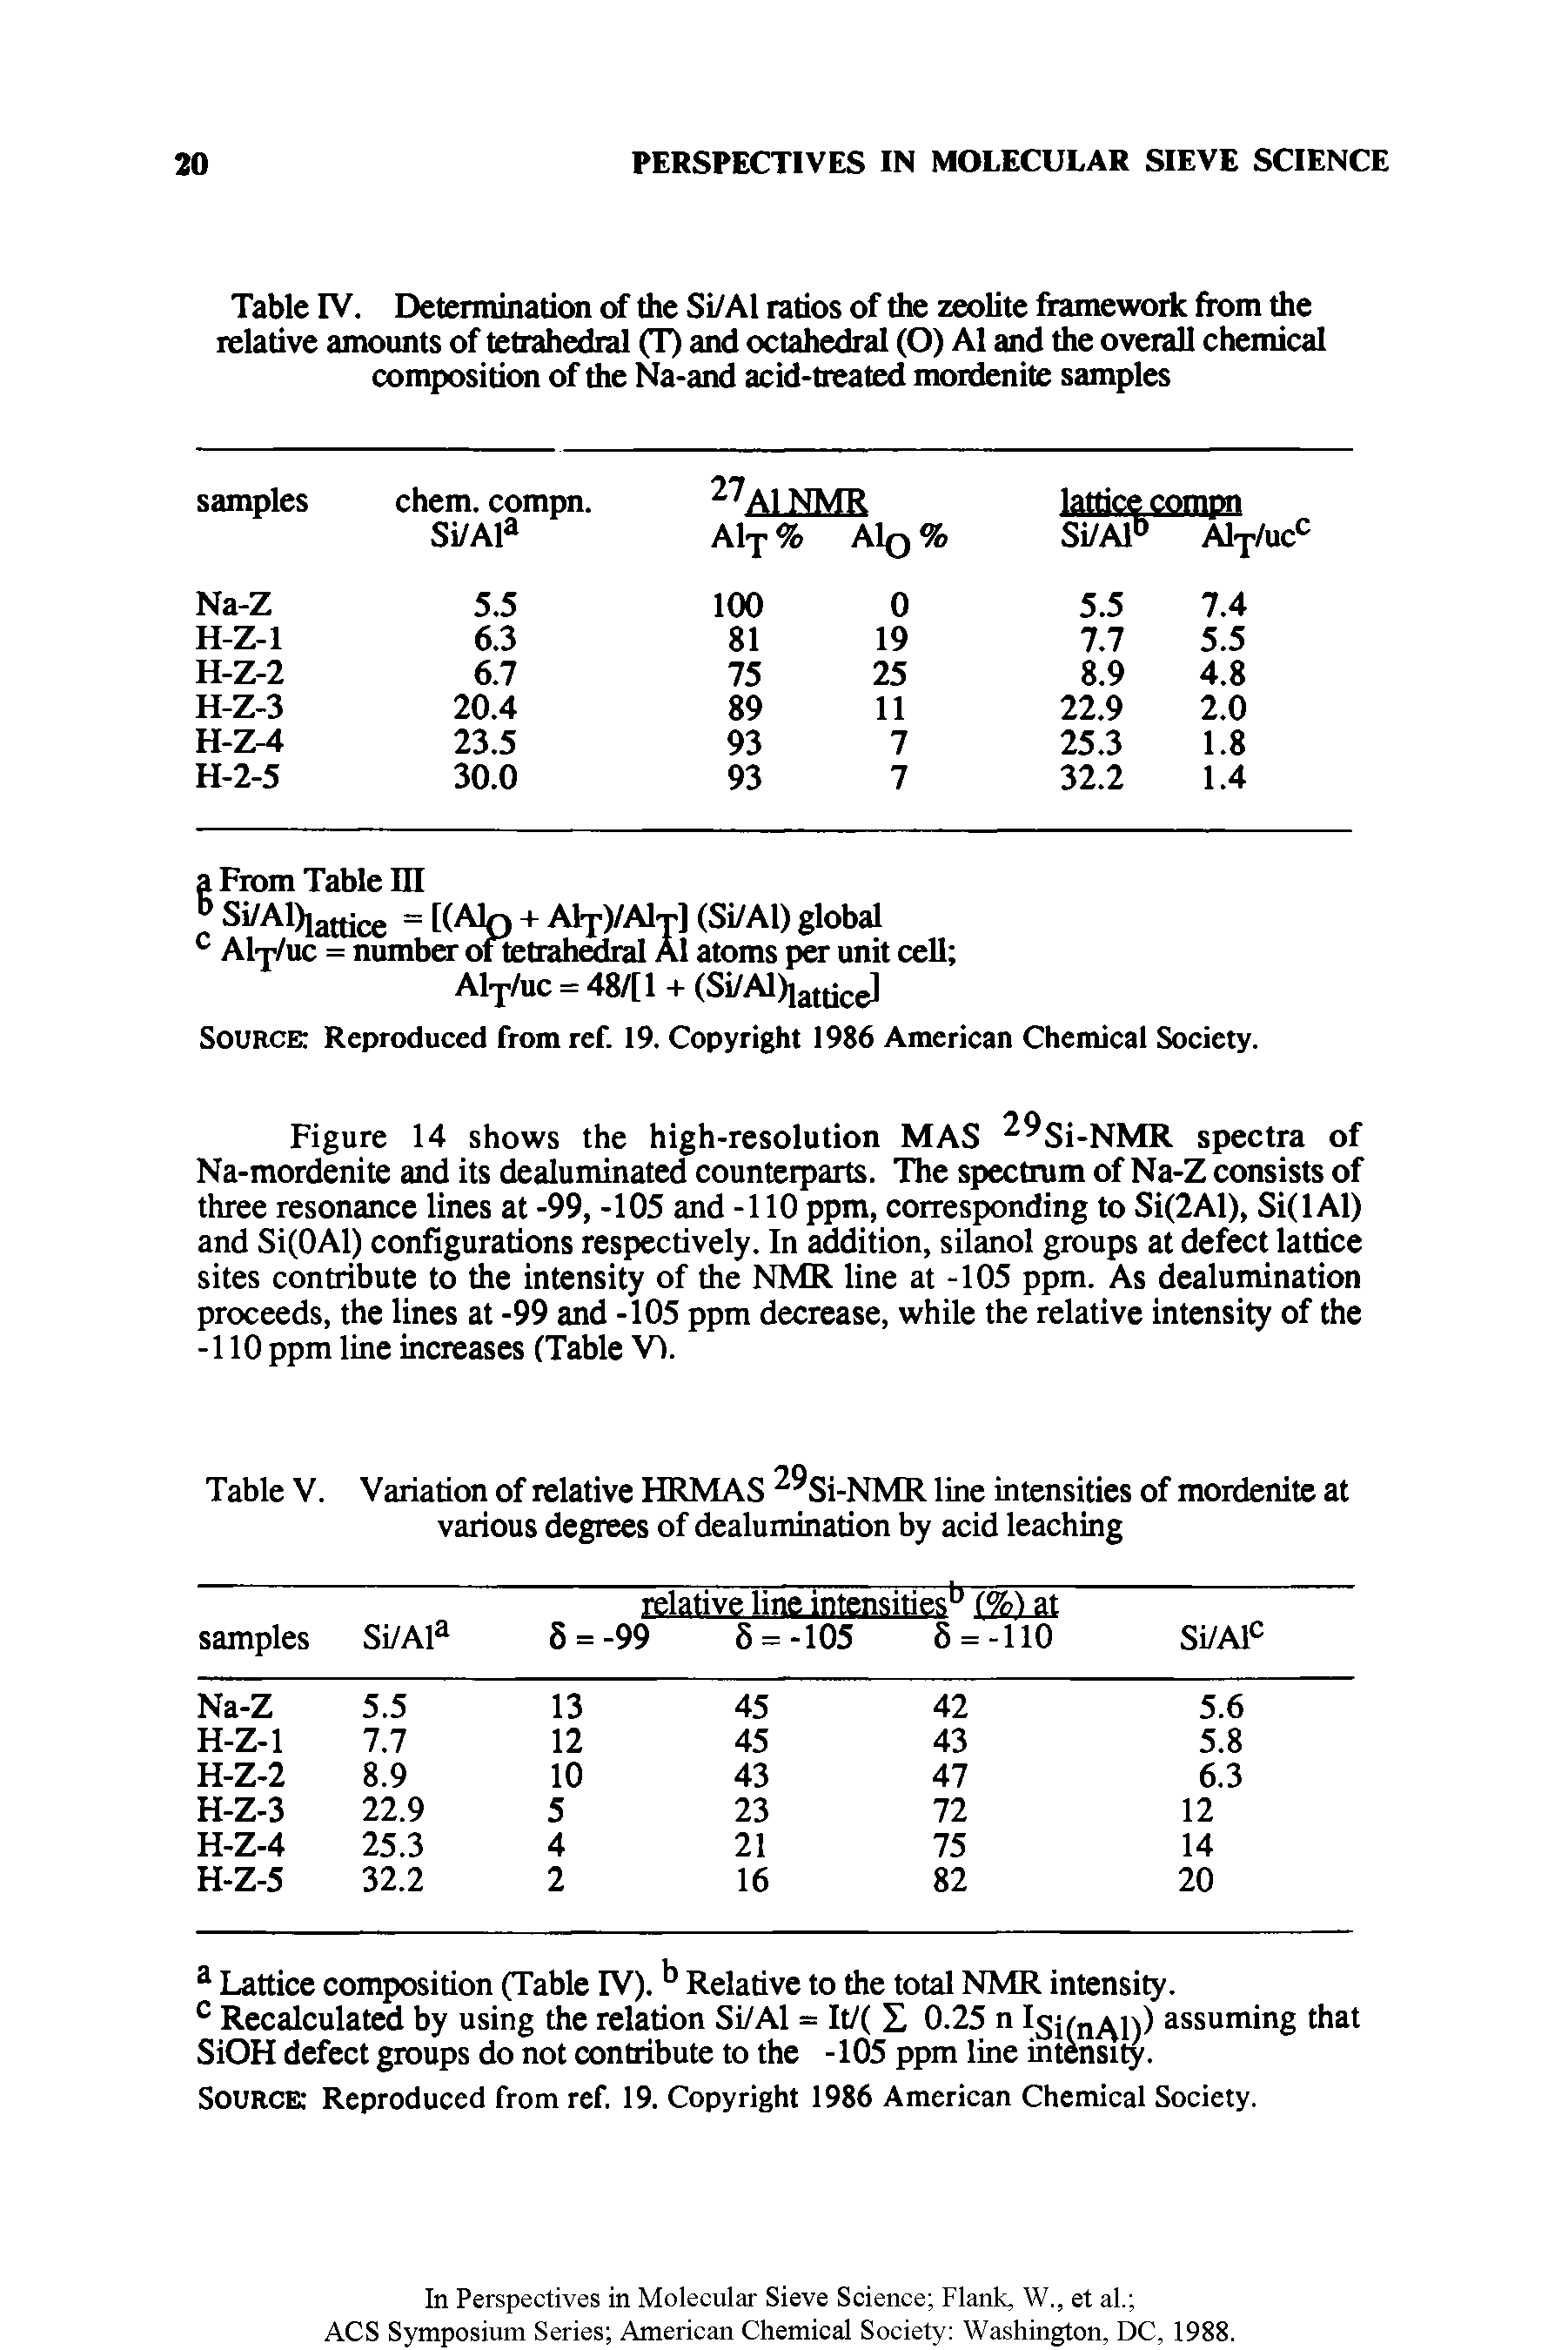 Table V. Variation of relative HRMAS Si-NMR line intensities of mordenite at various degrees of dealumination by acid leaching...